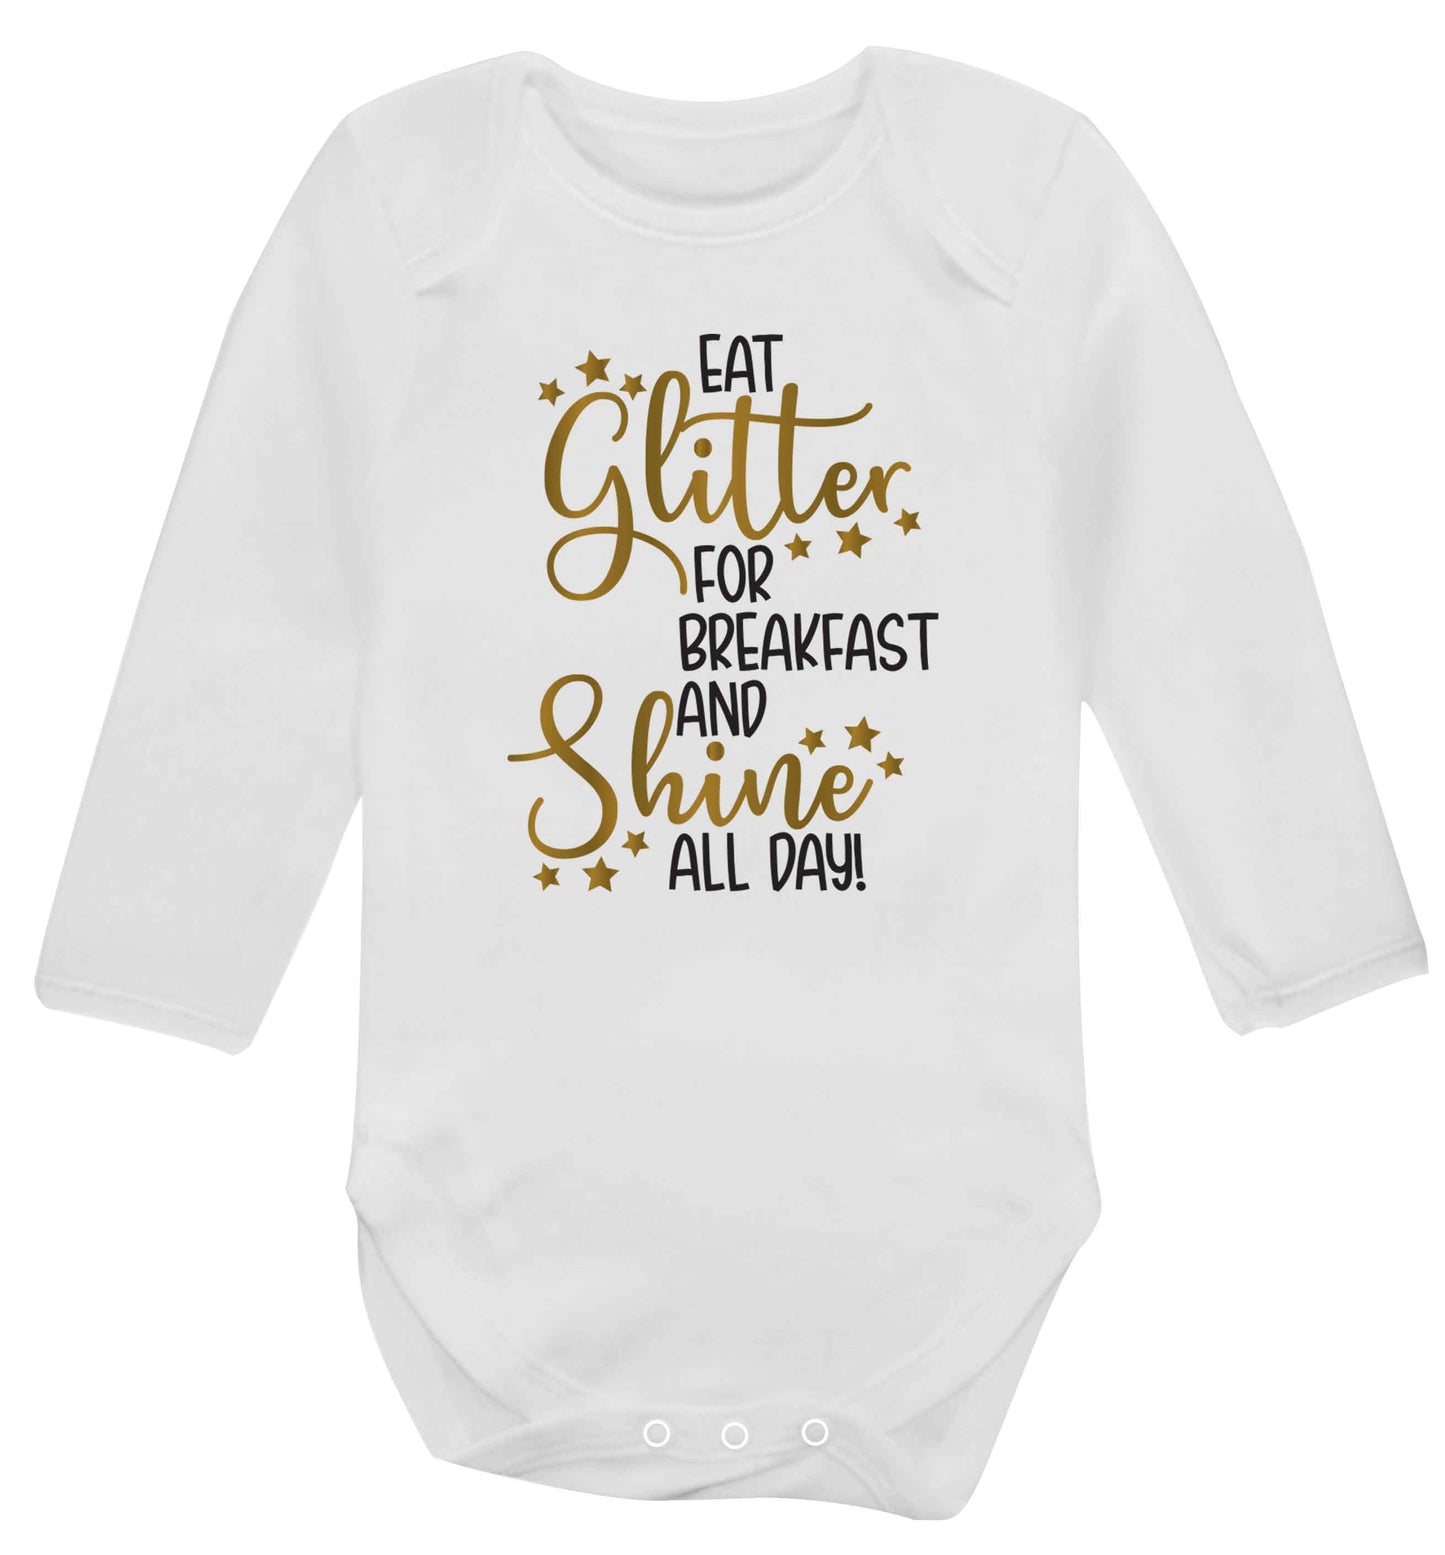 Eat glitter for breakfast and shine all day Baby Vest long sleeved white 6-12 months